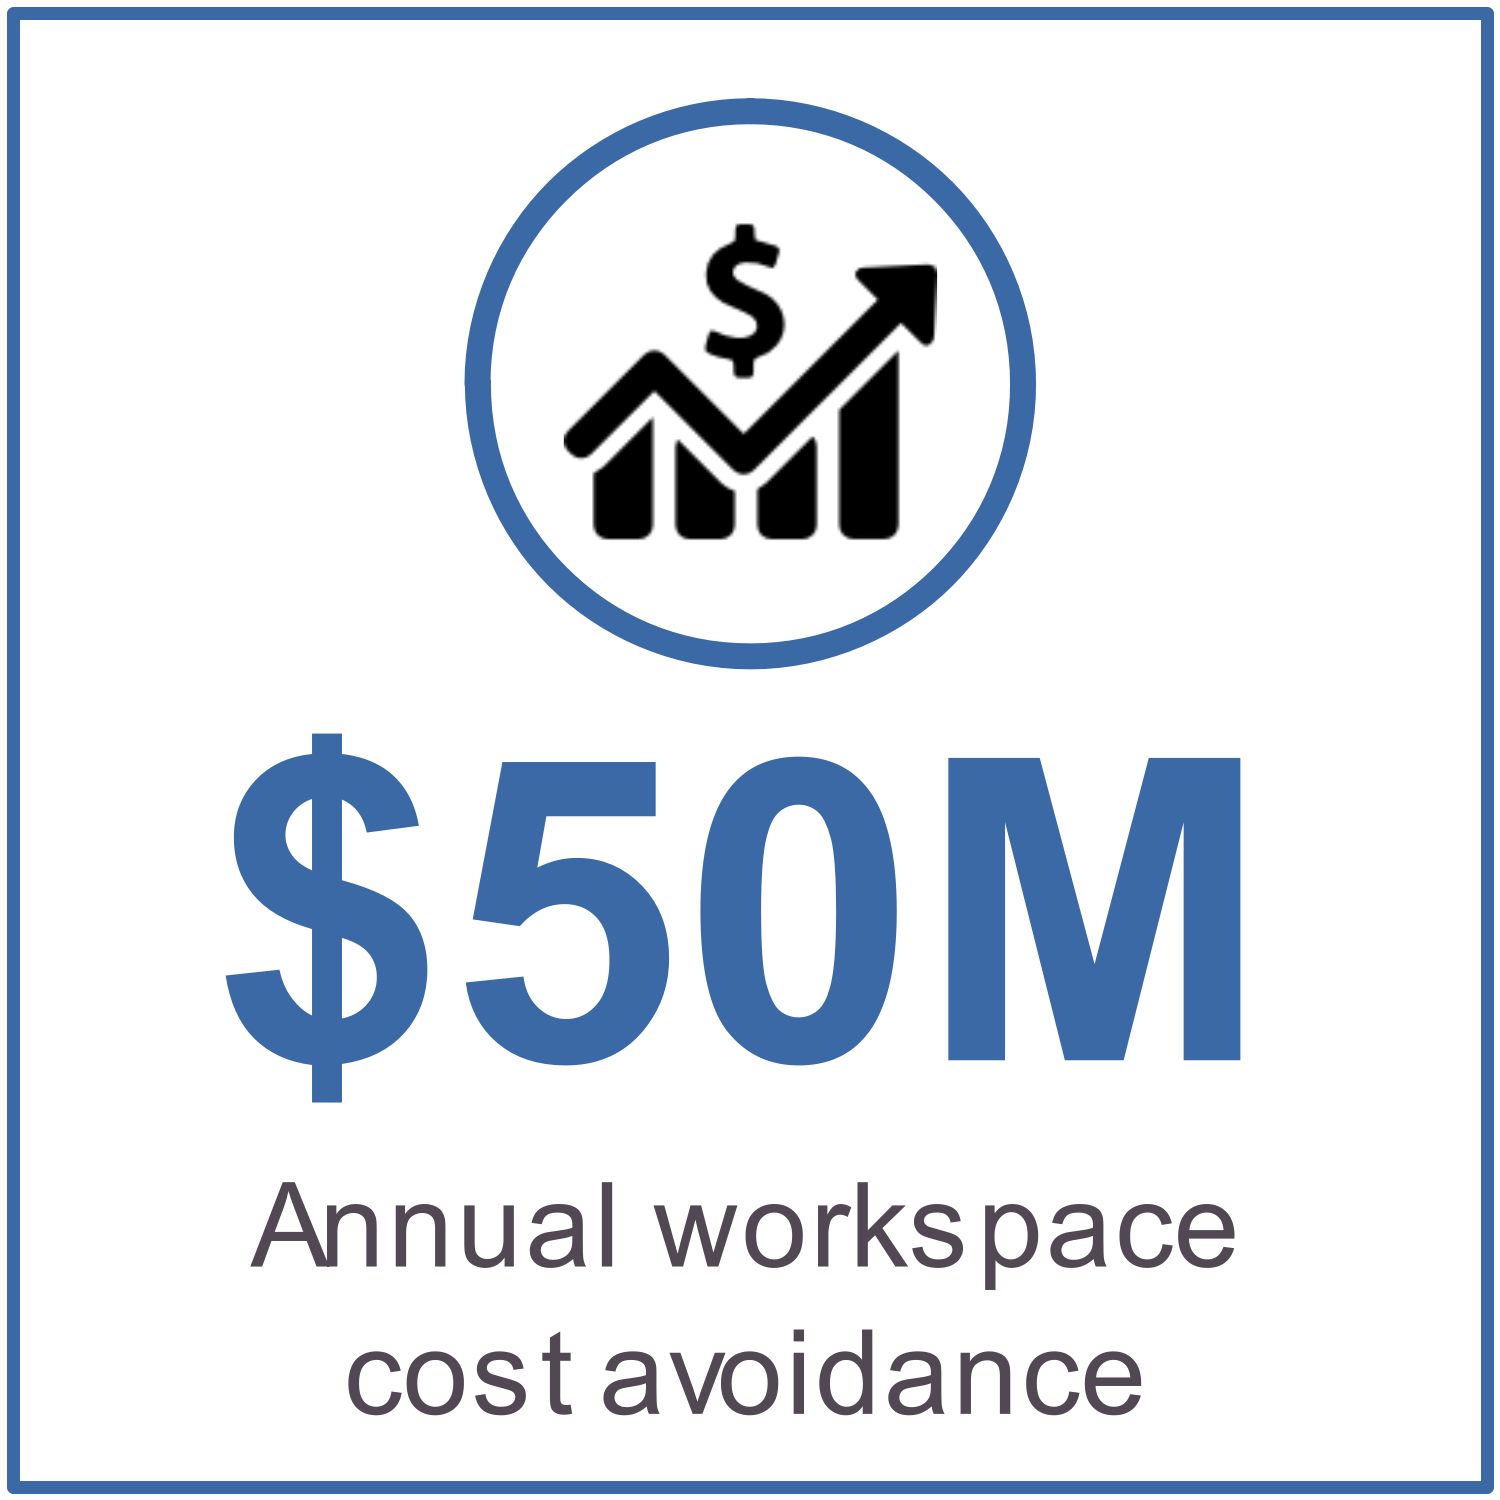 $50M in annual workspace cost avoidance